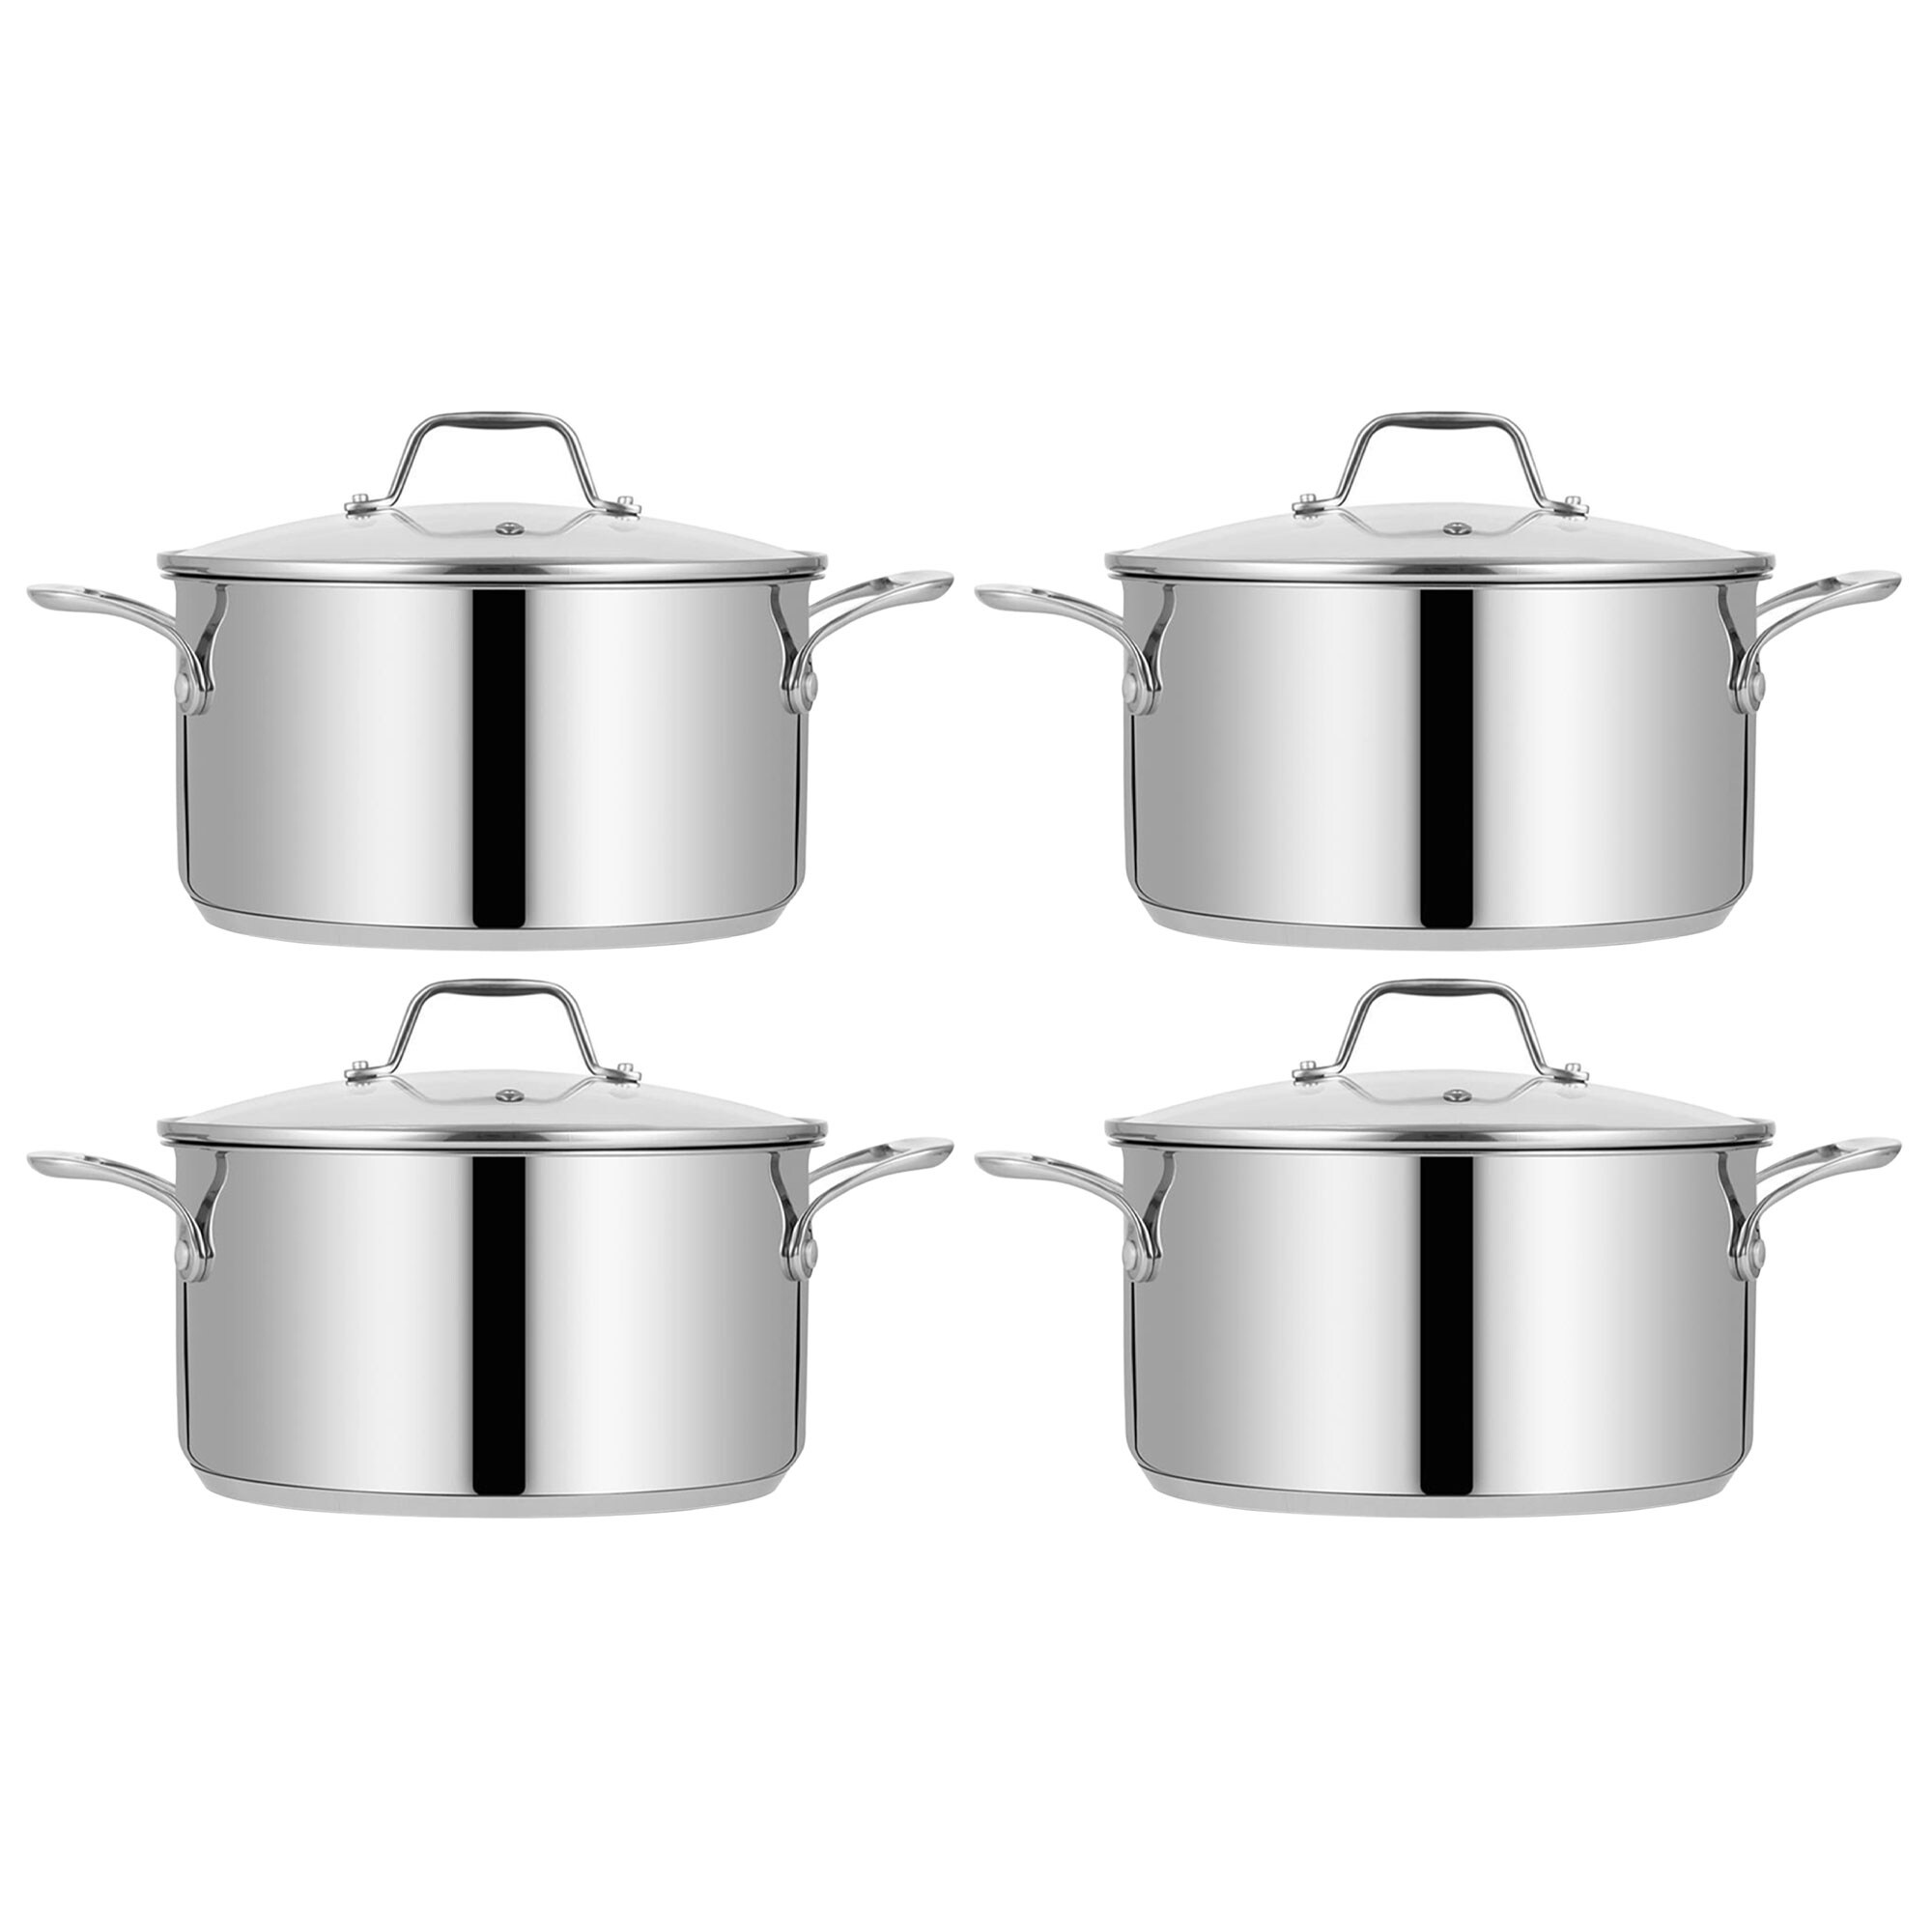 https://ak1.ostkcdn.com/images/products/is/images/direct/7accb449df730aaa3e479c1088df10a512592303/NutriChef-Heavy-Duty-8-Quart-Stainless-Steel-Soup-Stock-Pot-with-Lid-%284-Pack%29.jpg